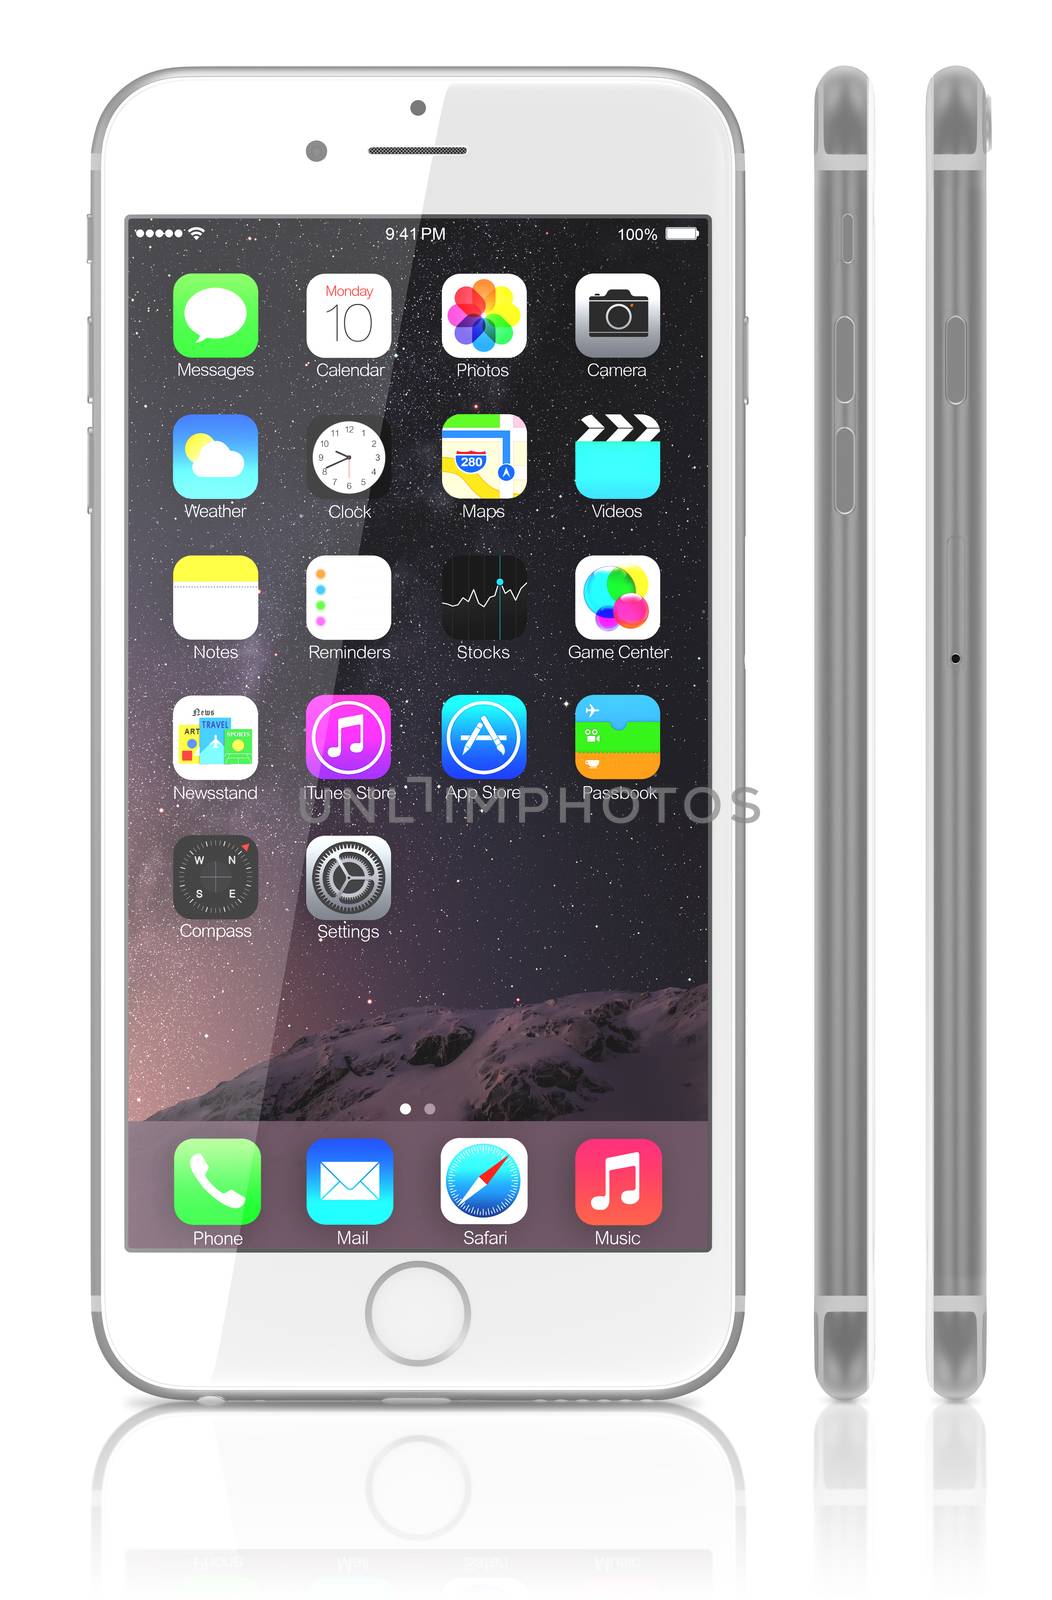 Galati, Romania - September 18, 2014: Apple Silver iPhone 6 Plus showing the home screen with iOS 8. View side of iPhone. The new iPhone with higher-resolution 4.7 and 5.5-inch screens, improved cameras, new sensors, a dedicated NFC chip for mobile payments. Apple released the iPhone 6 and iPhone 6 Plus on September 9, 2014.